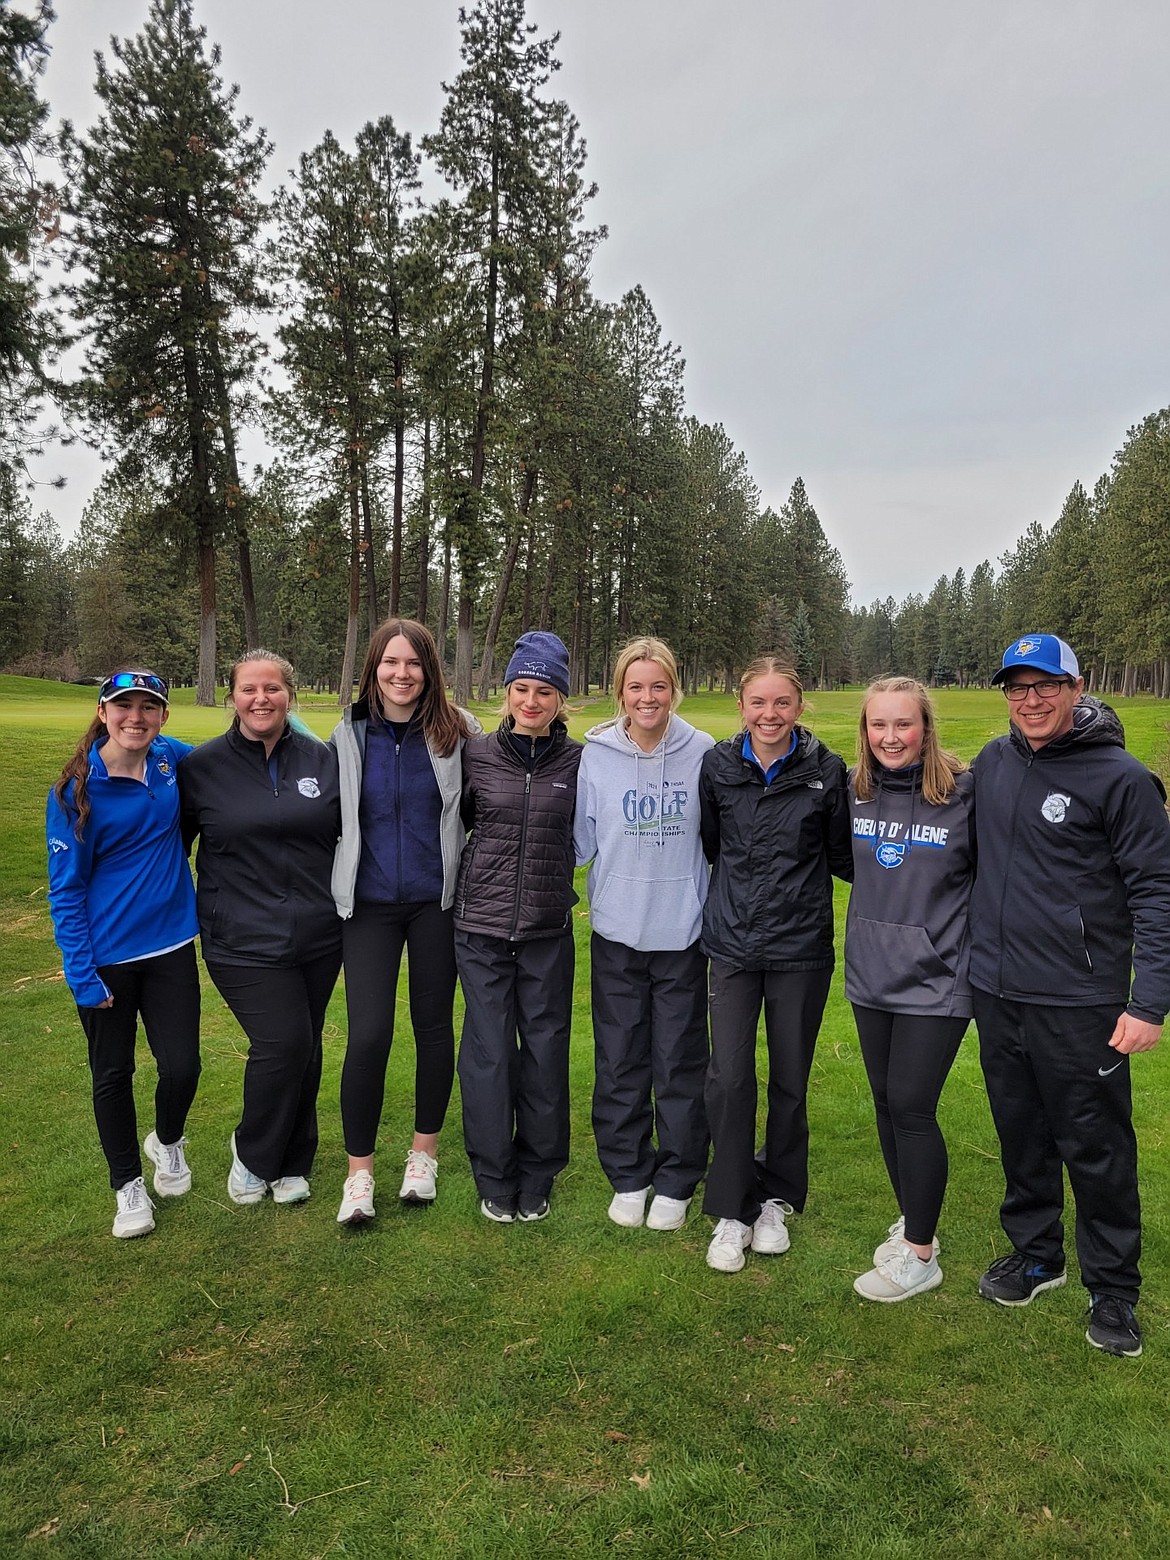 Courtesy photo
Coeur d'Alene's girls golf team finished second at the Lake City Invitational on Monday at the Coeur d'Alene Golf Club. From left are Hayden Crenshaw, Cass Lee, Payton Blood, Hailee Shirley, Taylor Potter, Paige Crabb, Brianna Priest and girls coach Jeff Lake.